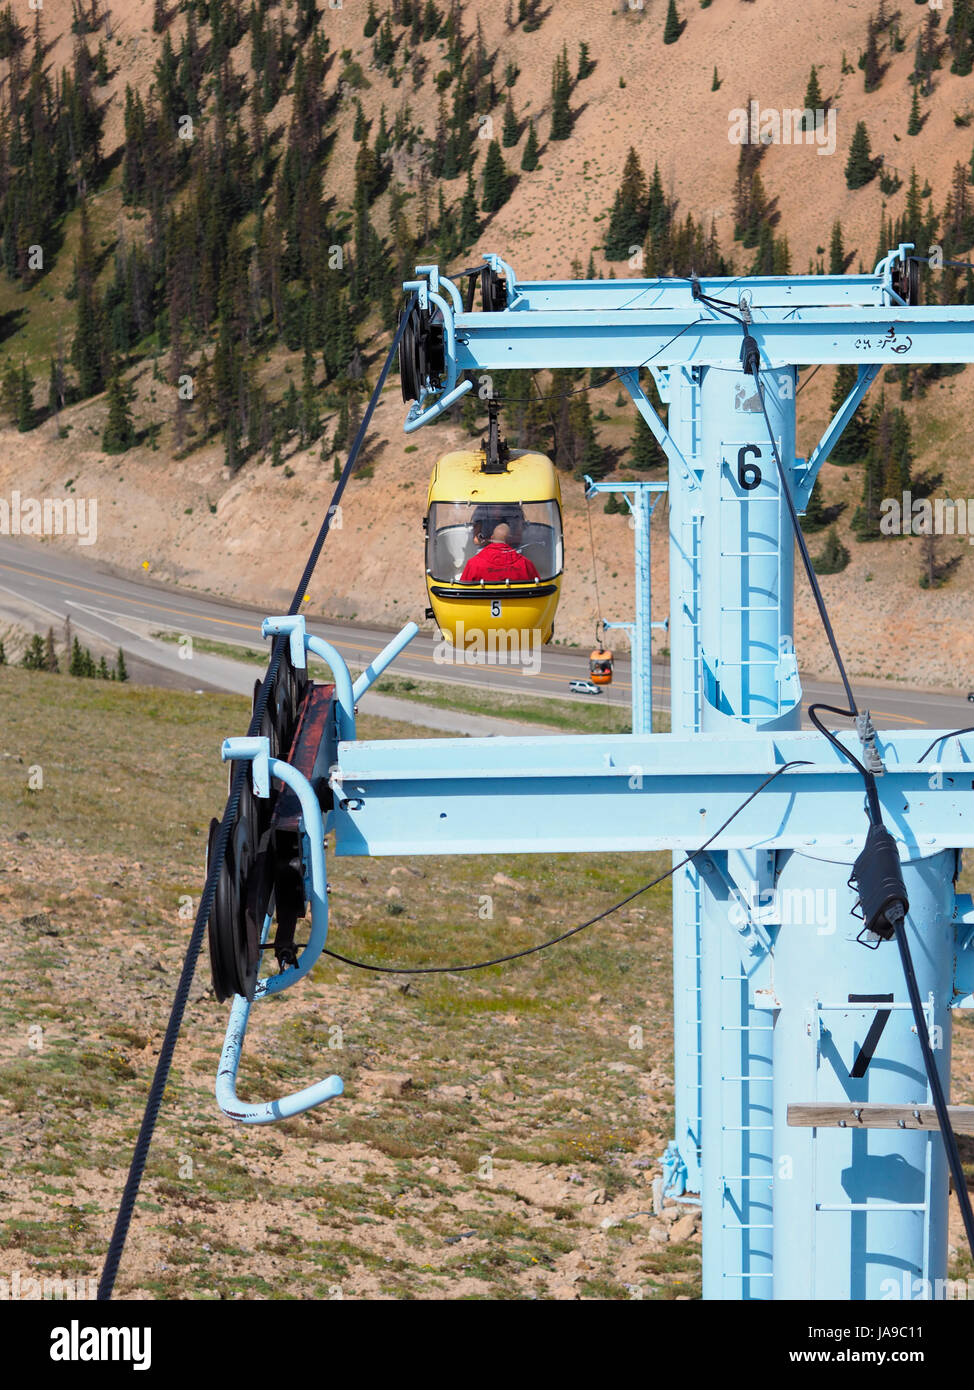 Touristic aerial tram / cable car leading up to Monarch Ridge, (elevation 12,000 ft/3700m) and the Continental Divide in the Colorado Rocky Mountains. Stock Photo